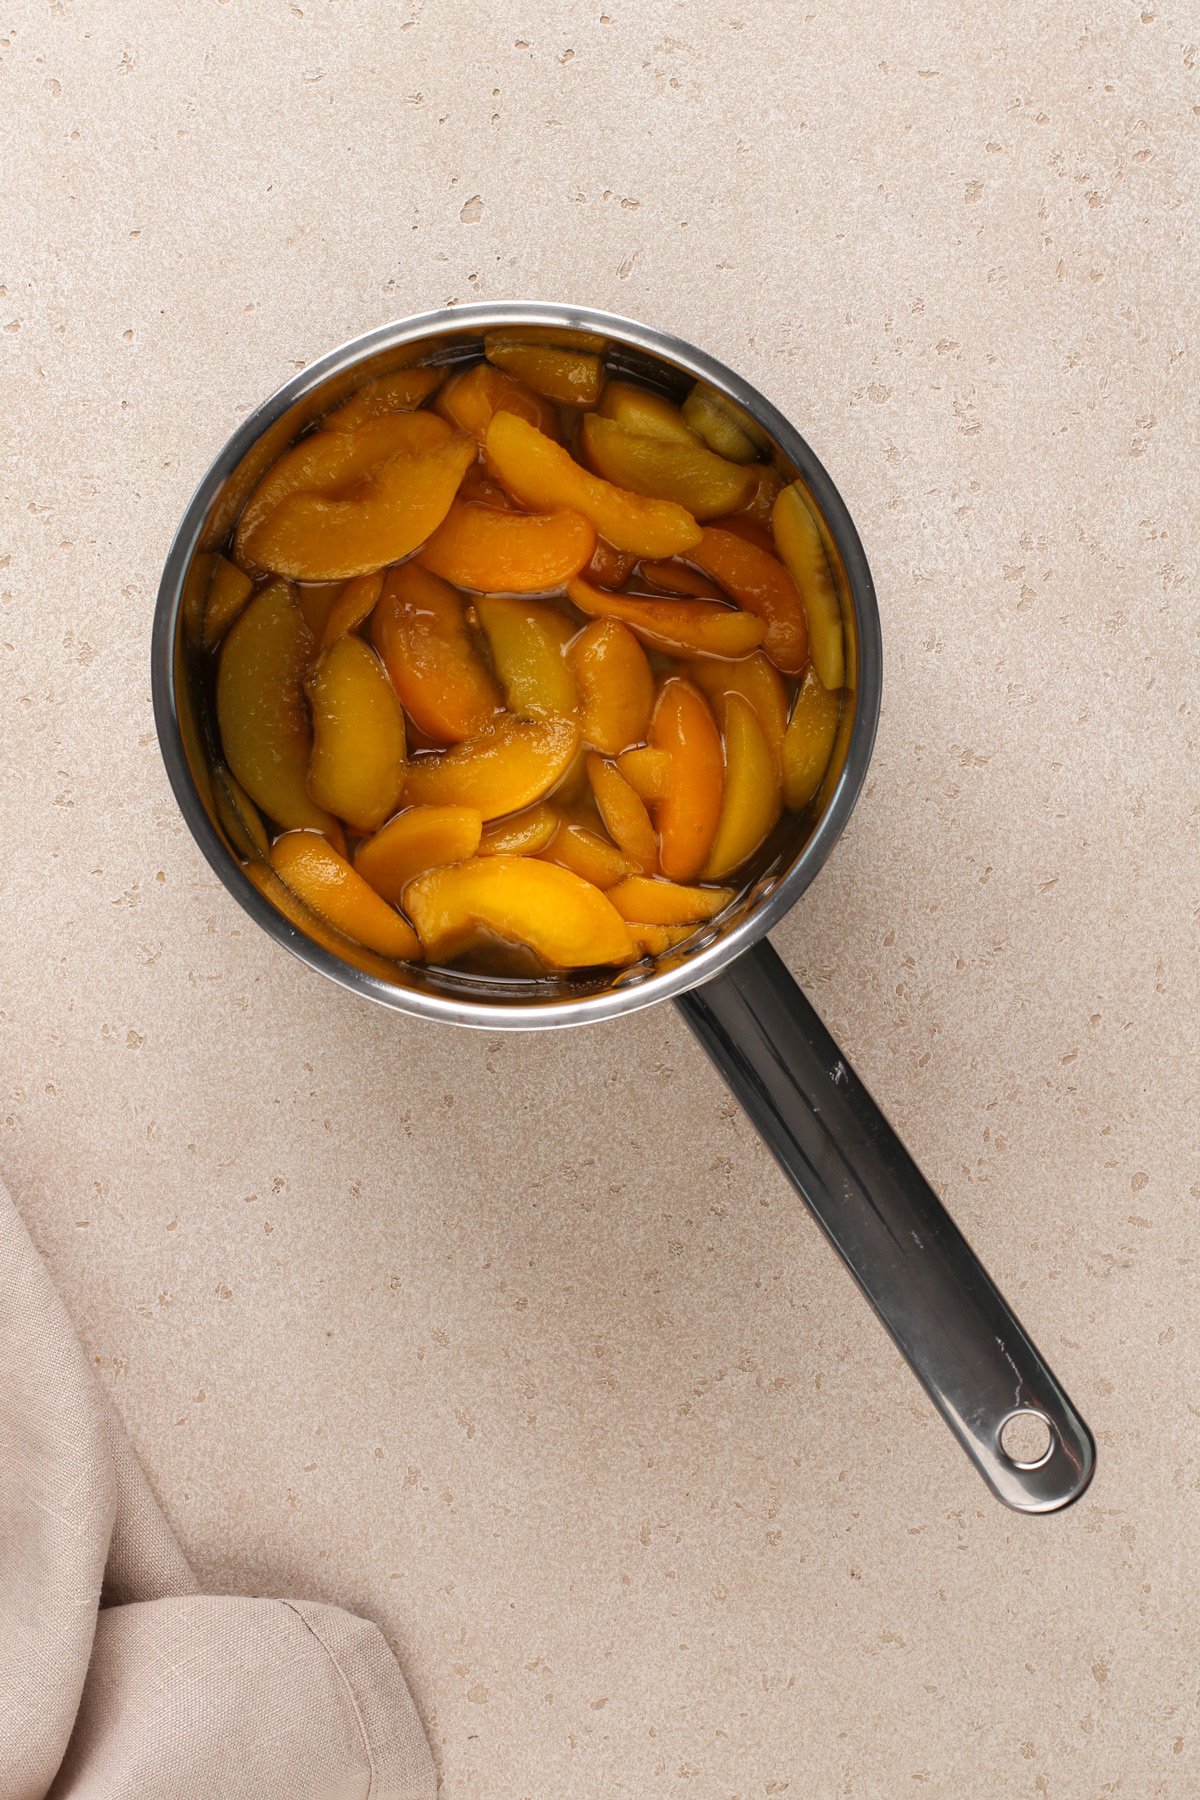 Peaches cooked down in a metal saucepan.